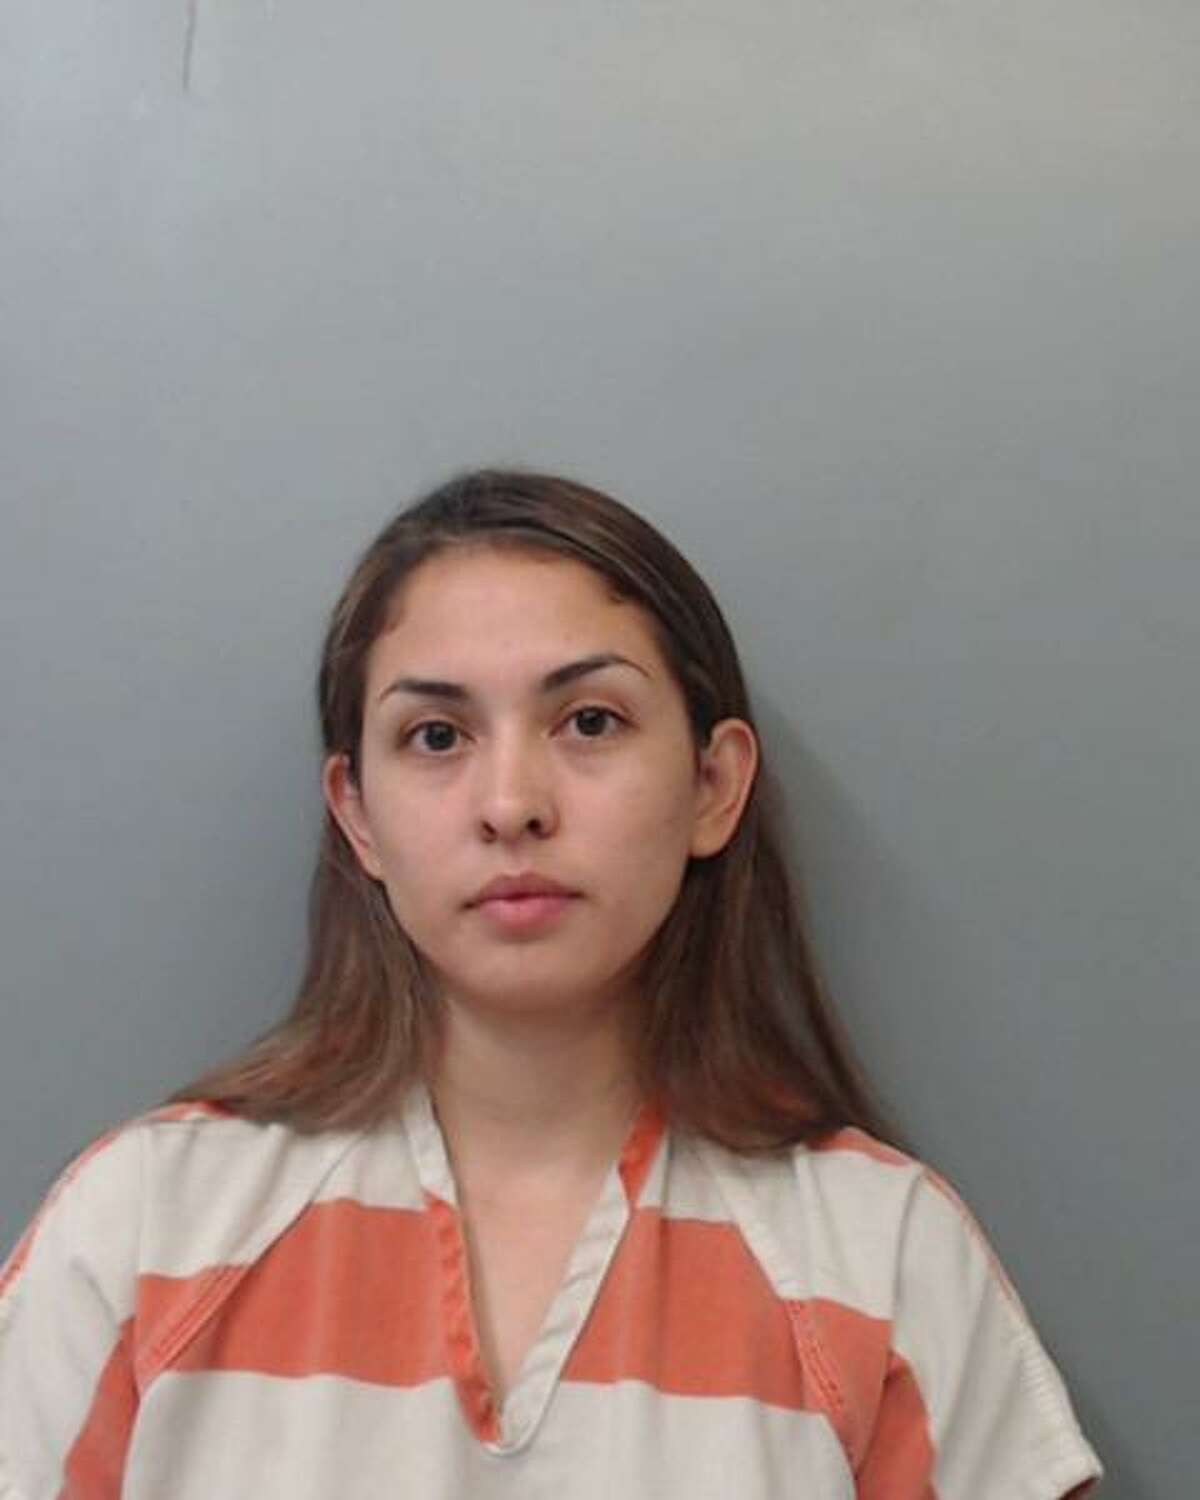 Lucero Vasquez, 27, was arrested and charged with theft.